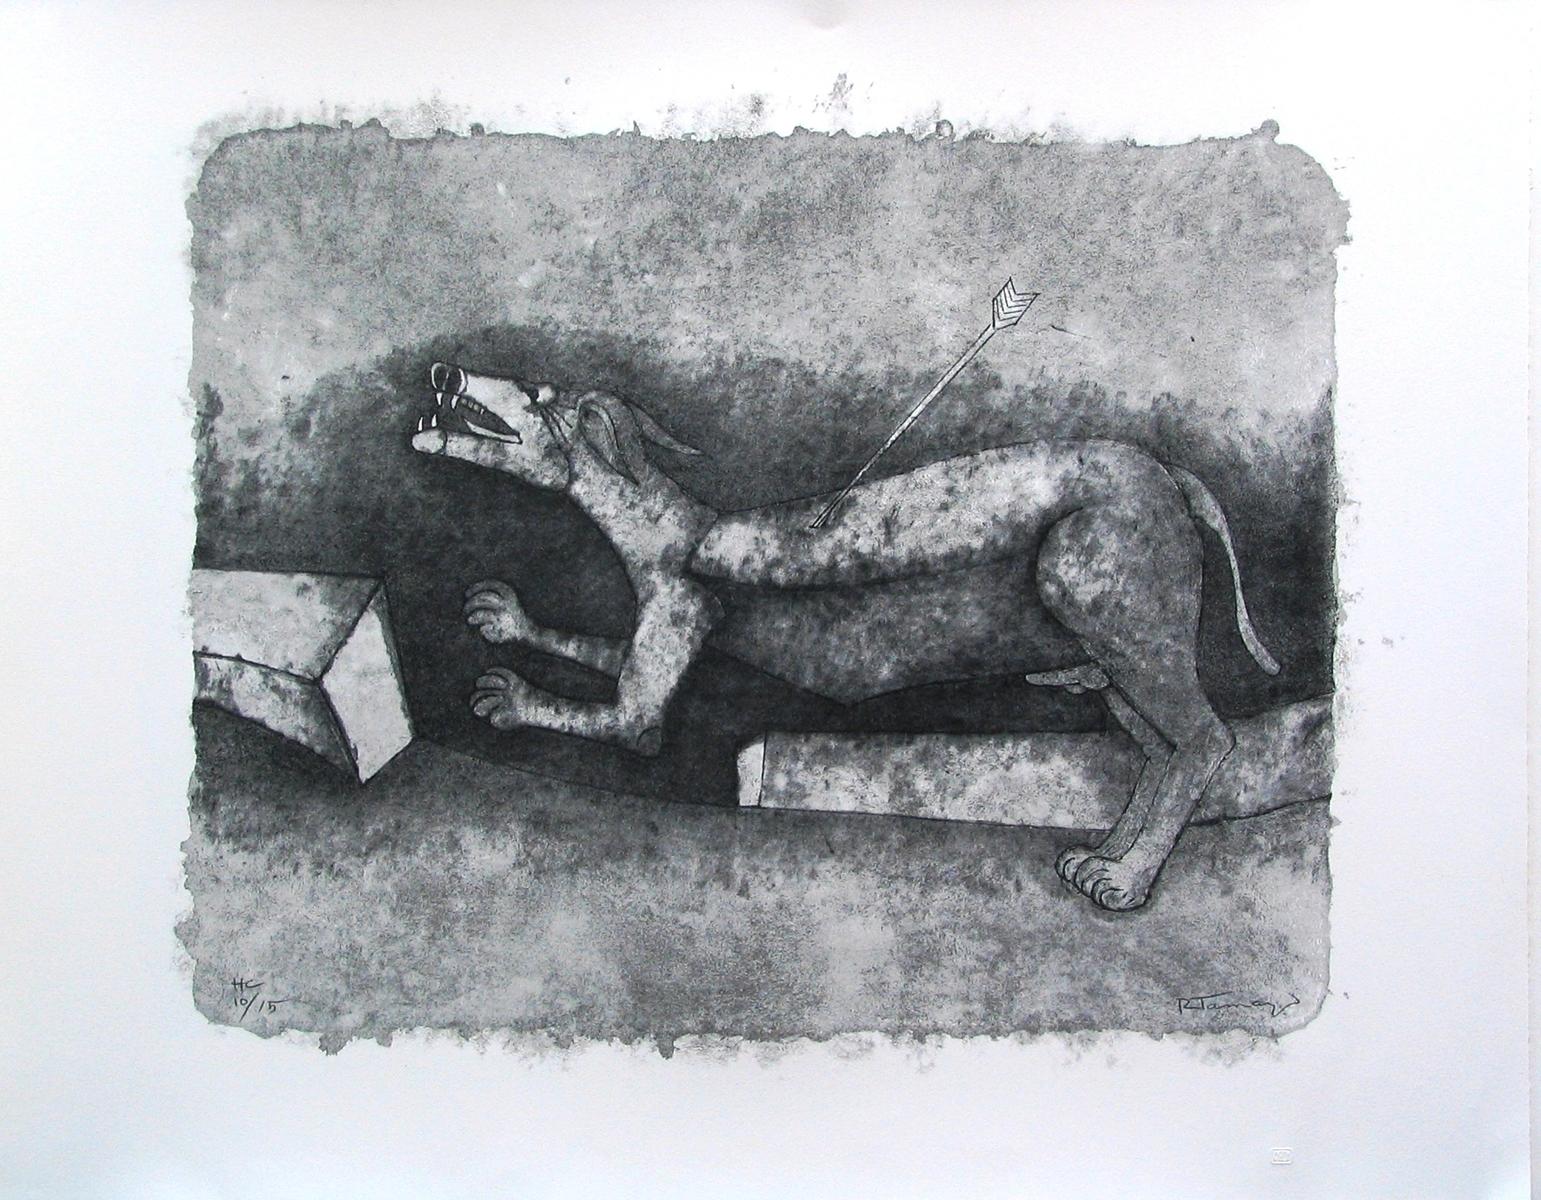 Mexican Artist ¨Perro Herido¨ signed limited edition original art lithograph - Print by Rufino Tamayo